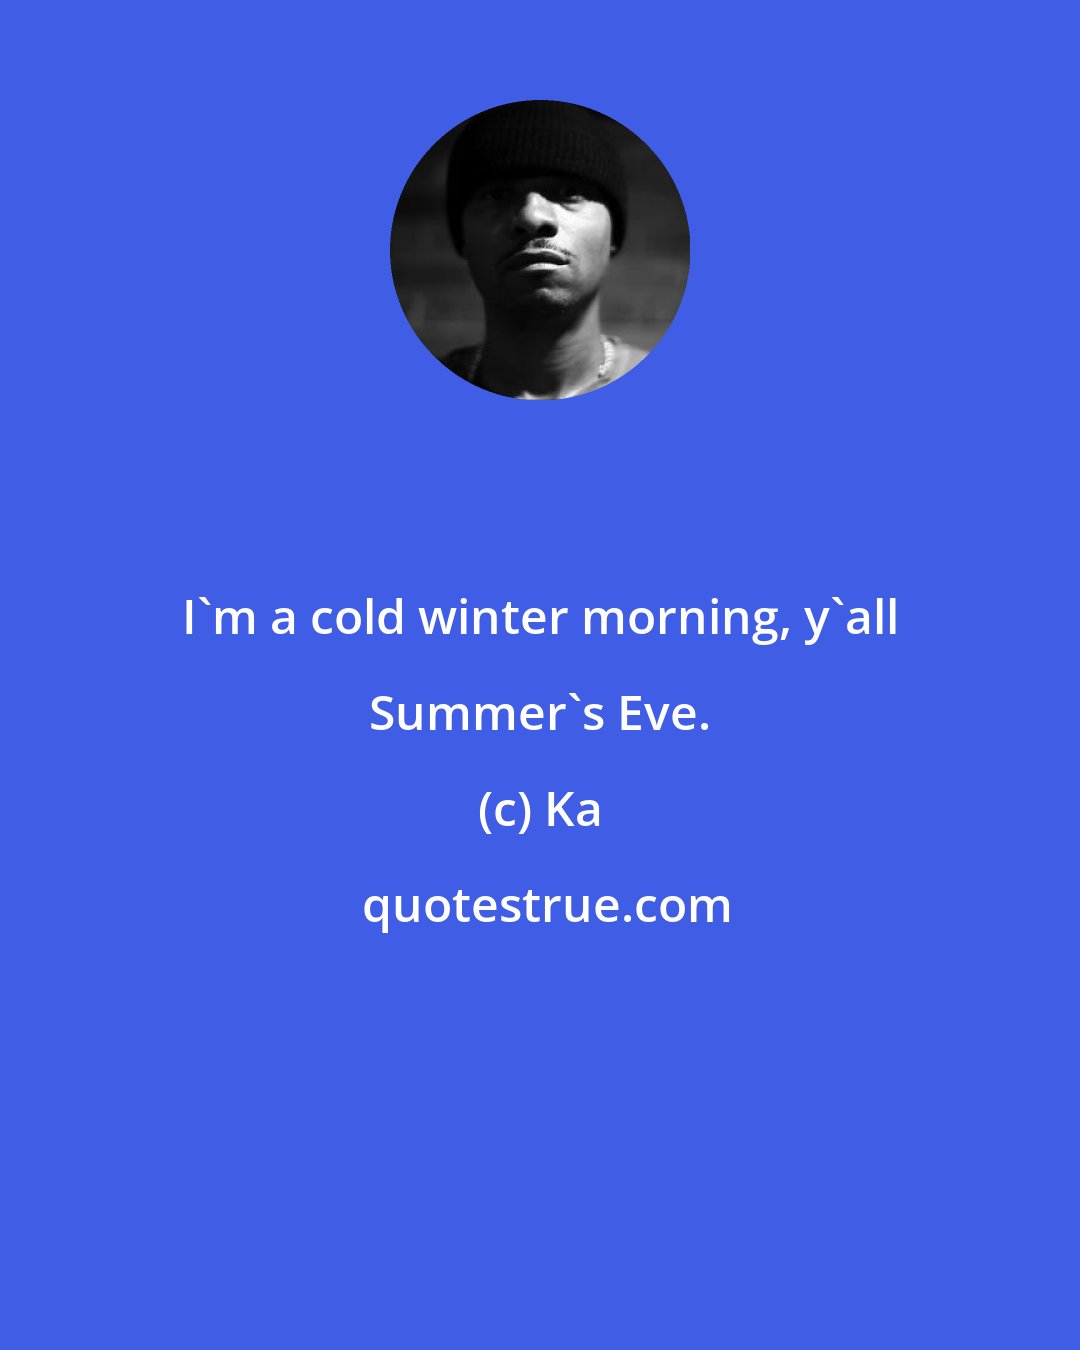 Ka: I'm a cold winter morning, y'all Summer's Eve.